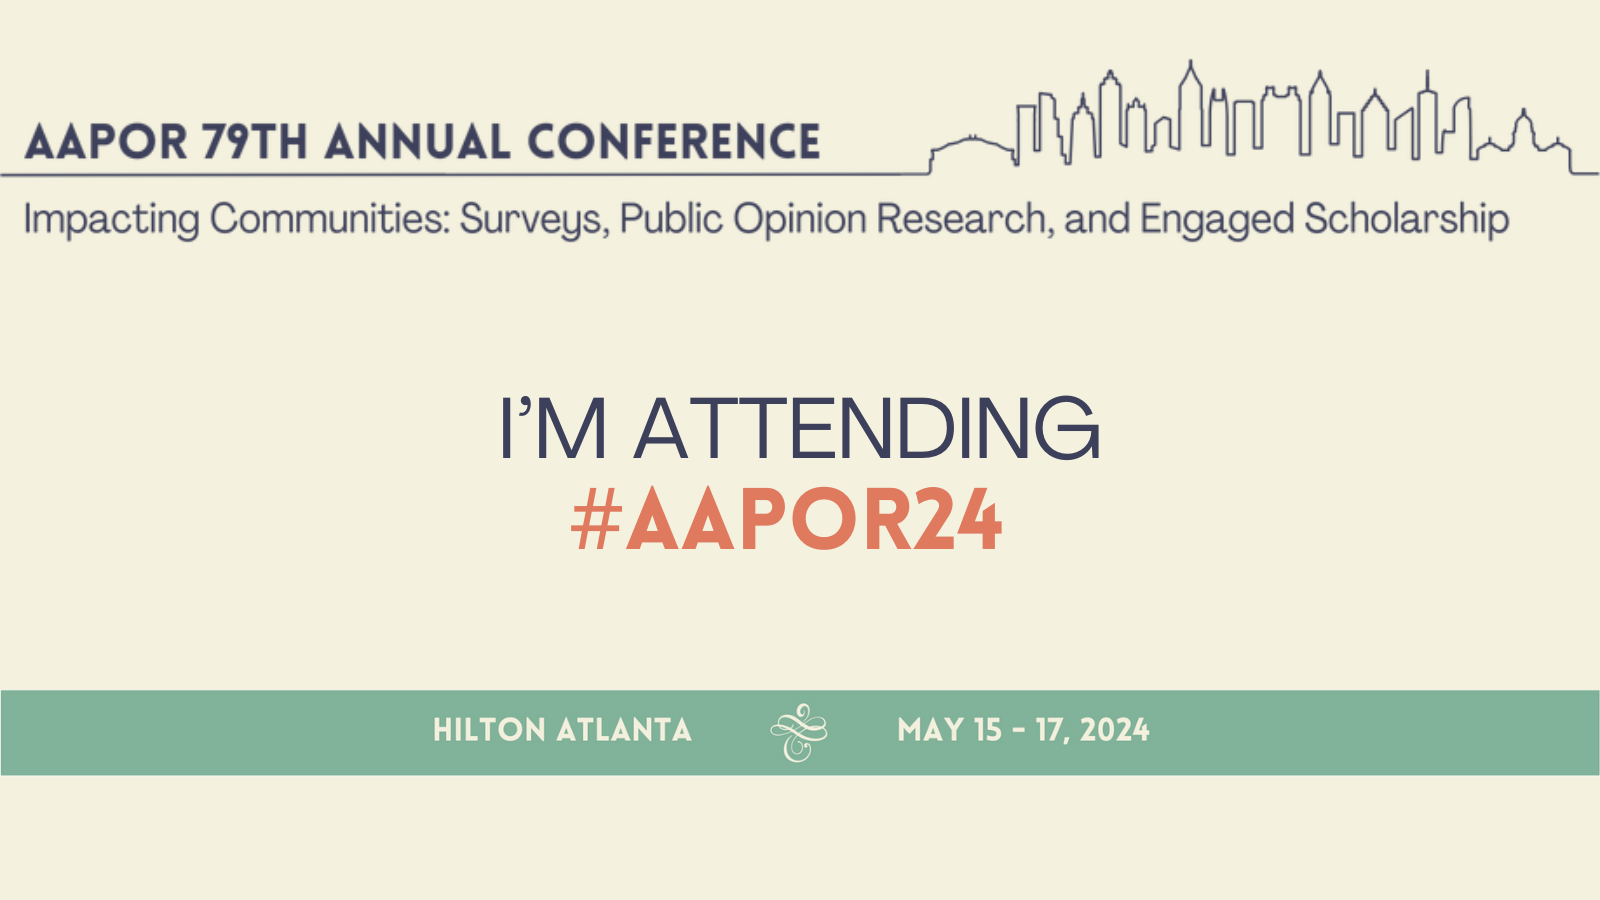 CETRA to Attend AAPOR24 Conference